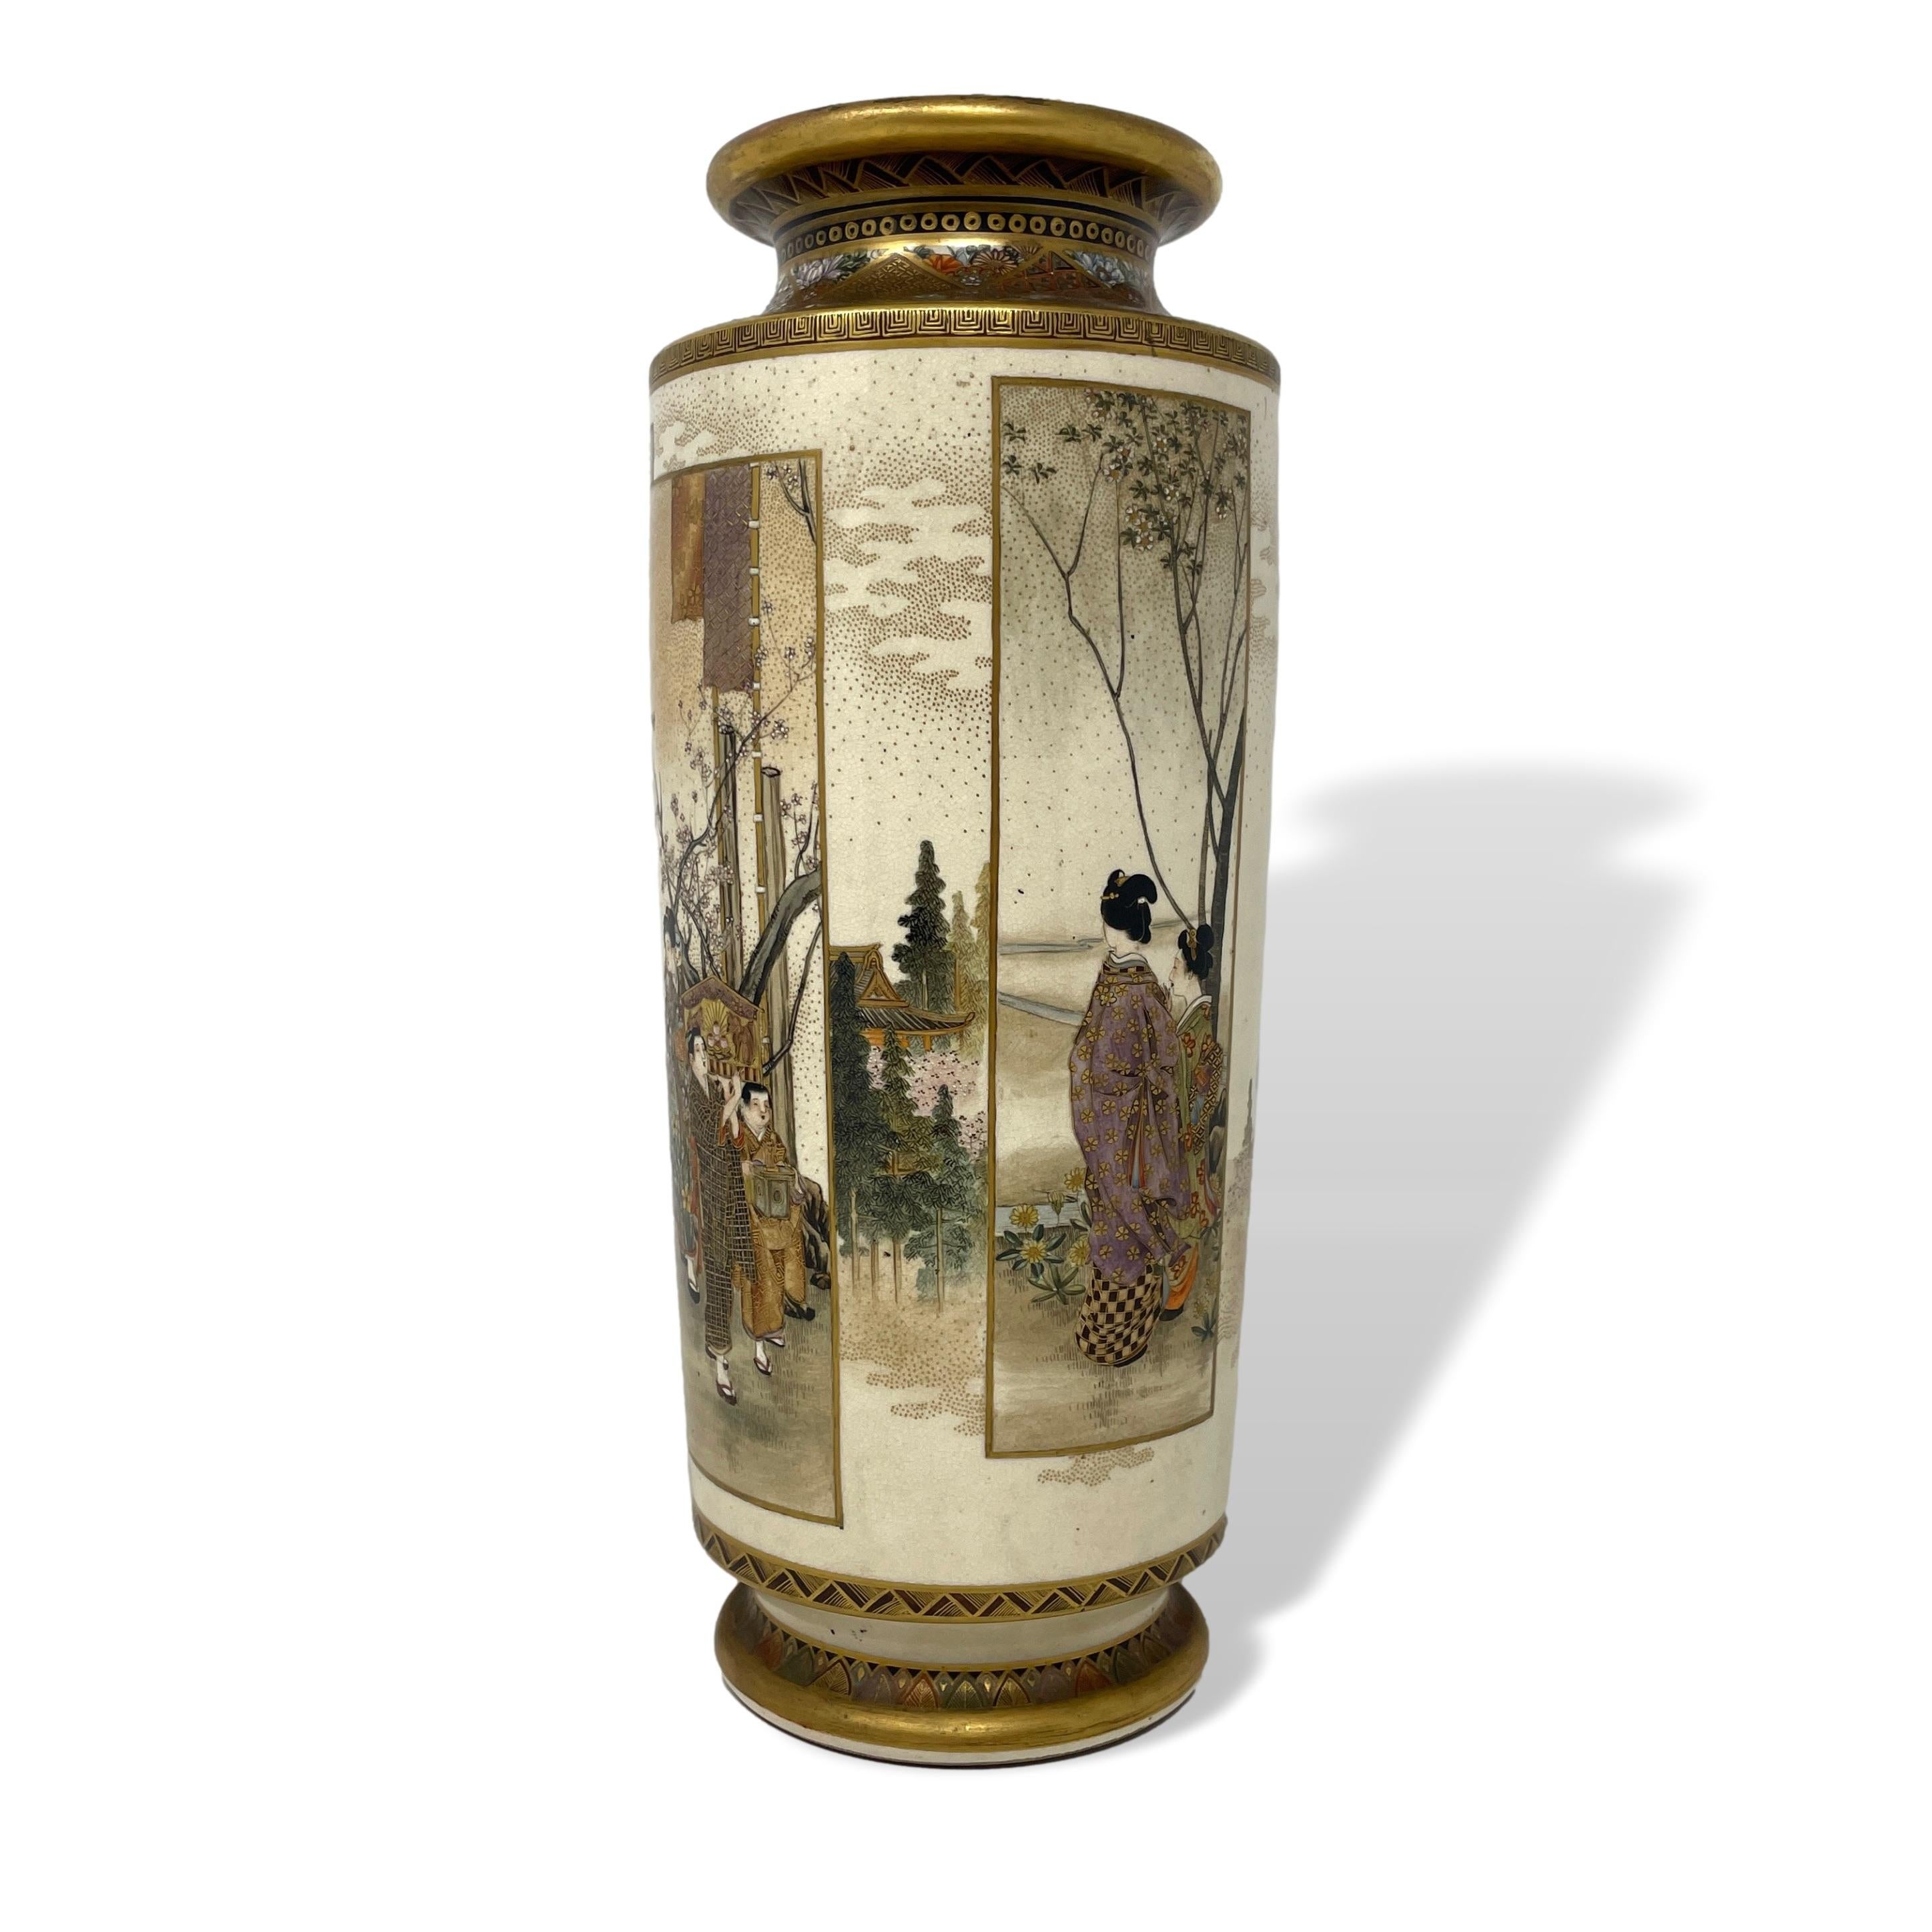 As part of our Japanese collection we are thrilled to offer this Japanese Meiji period sleeve vase. The vase of cylindrical form with pinched neck, rolled top and bottom rim and large opening. Decorated beautifully with multiple scenes overlaying a